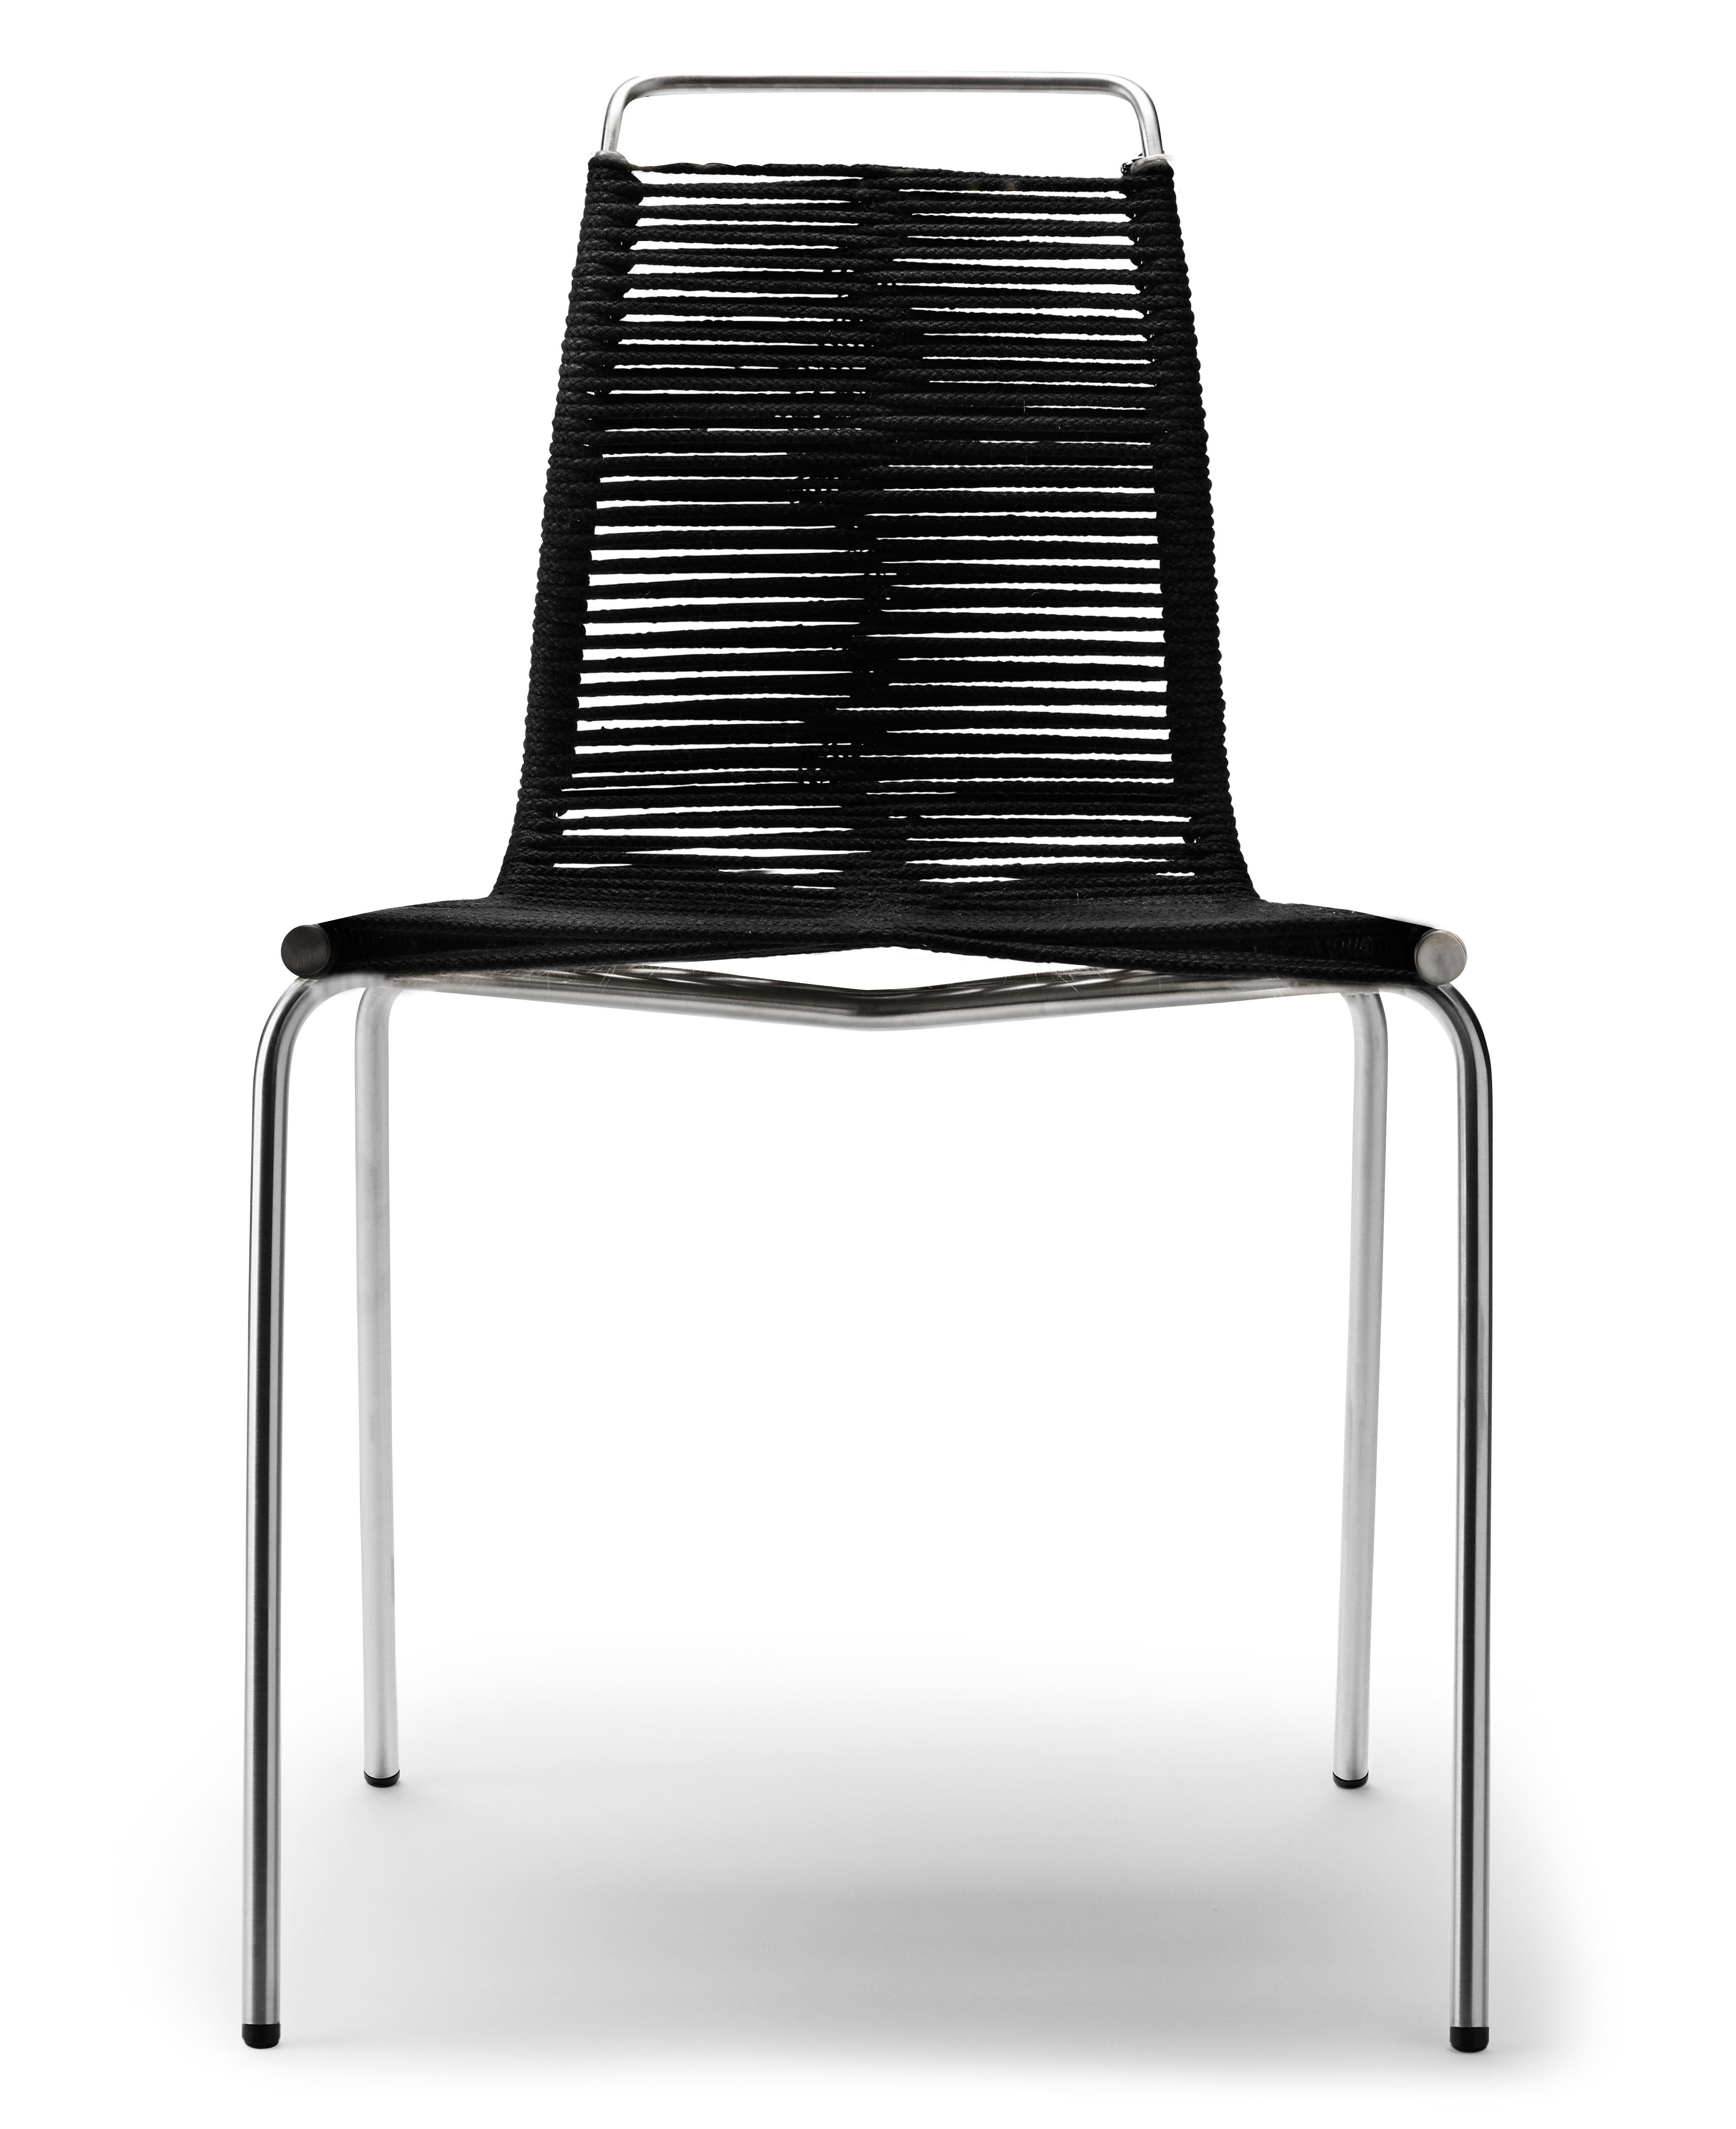 Beige (Woven Flag Halyard Natural-Black) PK1 Dining Chair in Stainless Steel Base by Poul Kjærholm